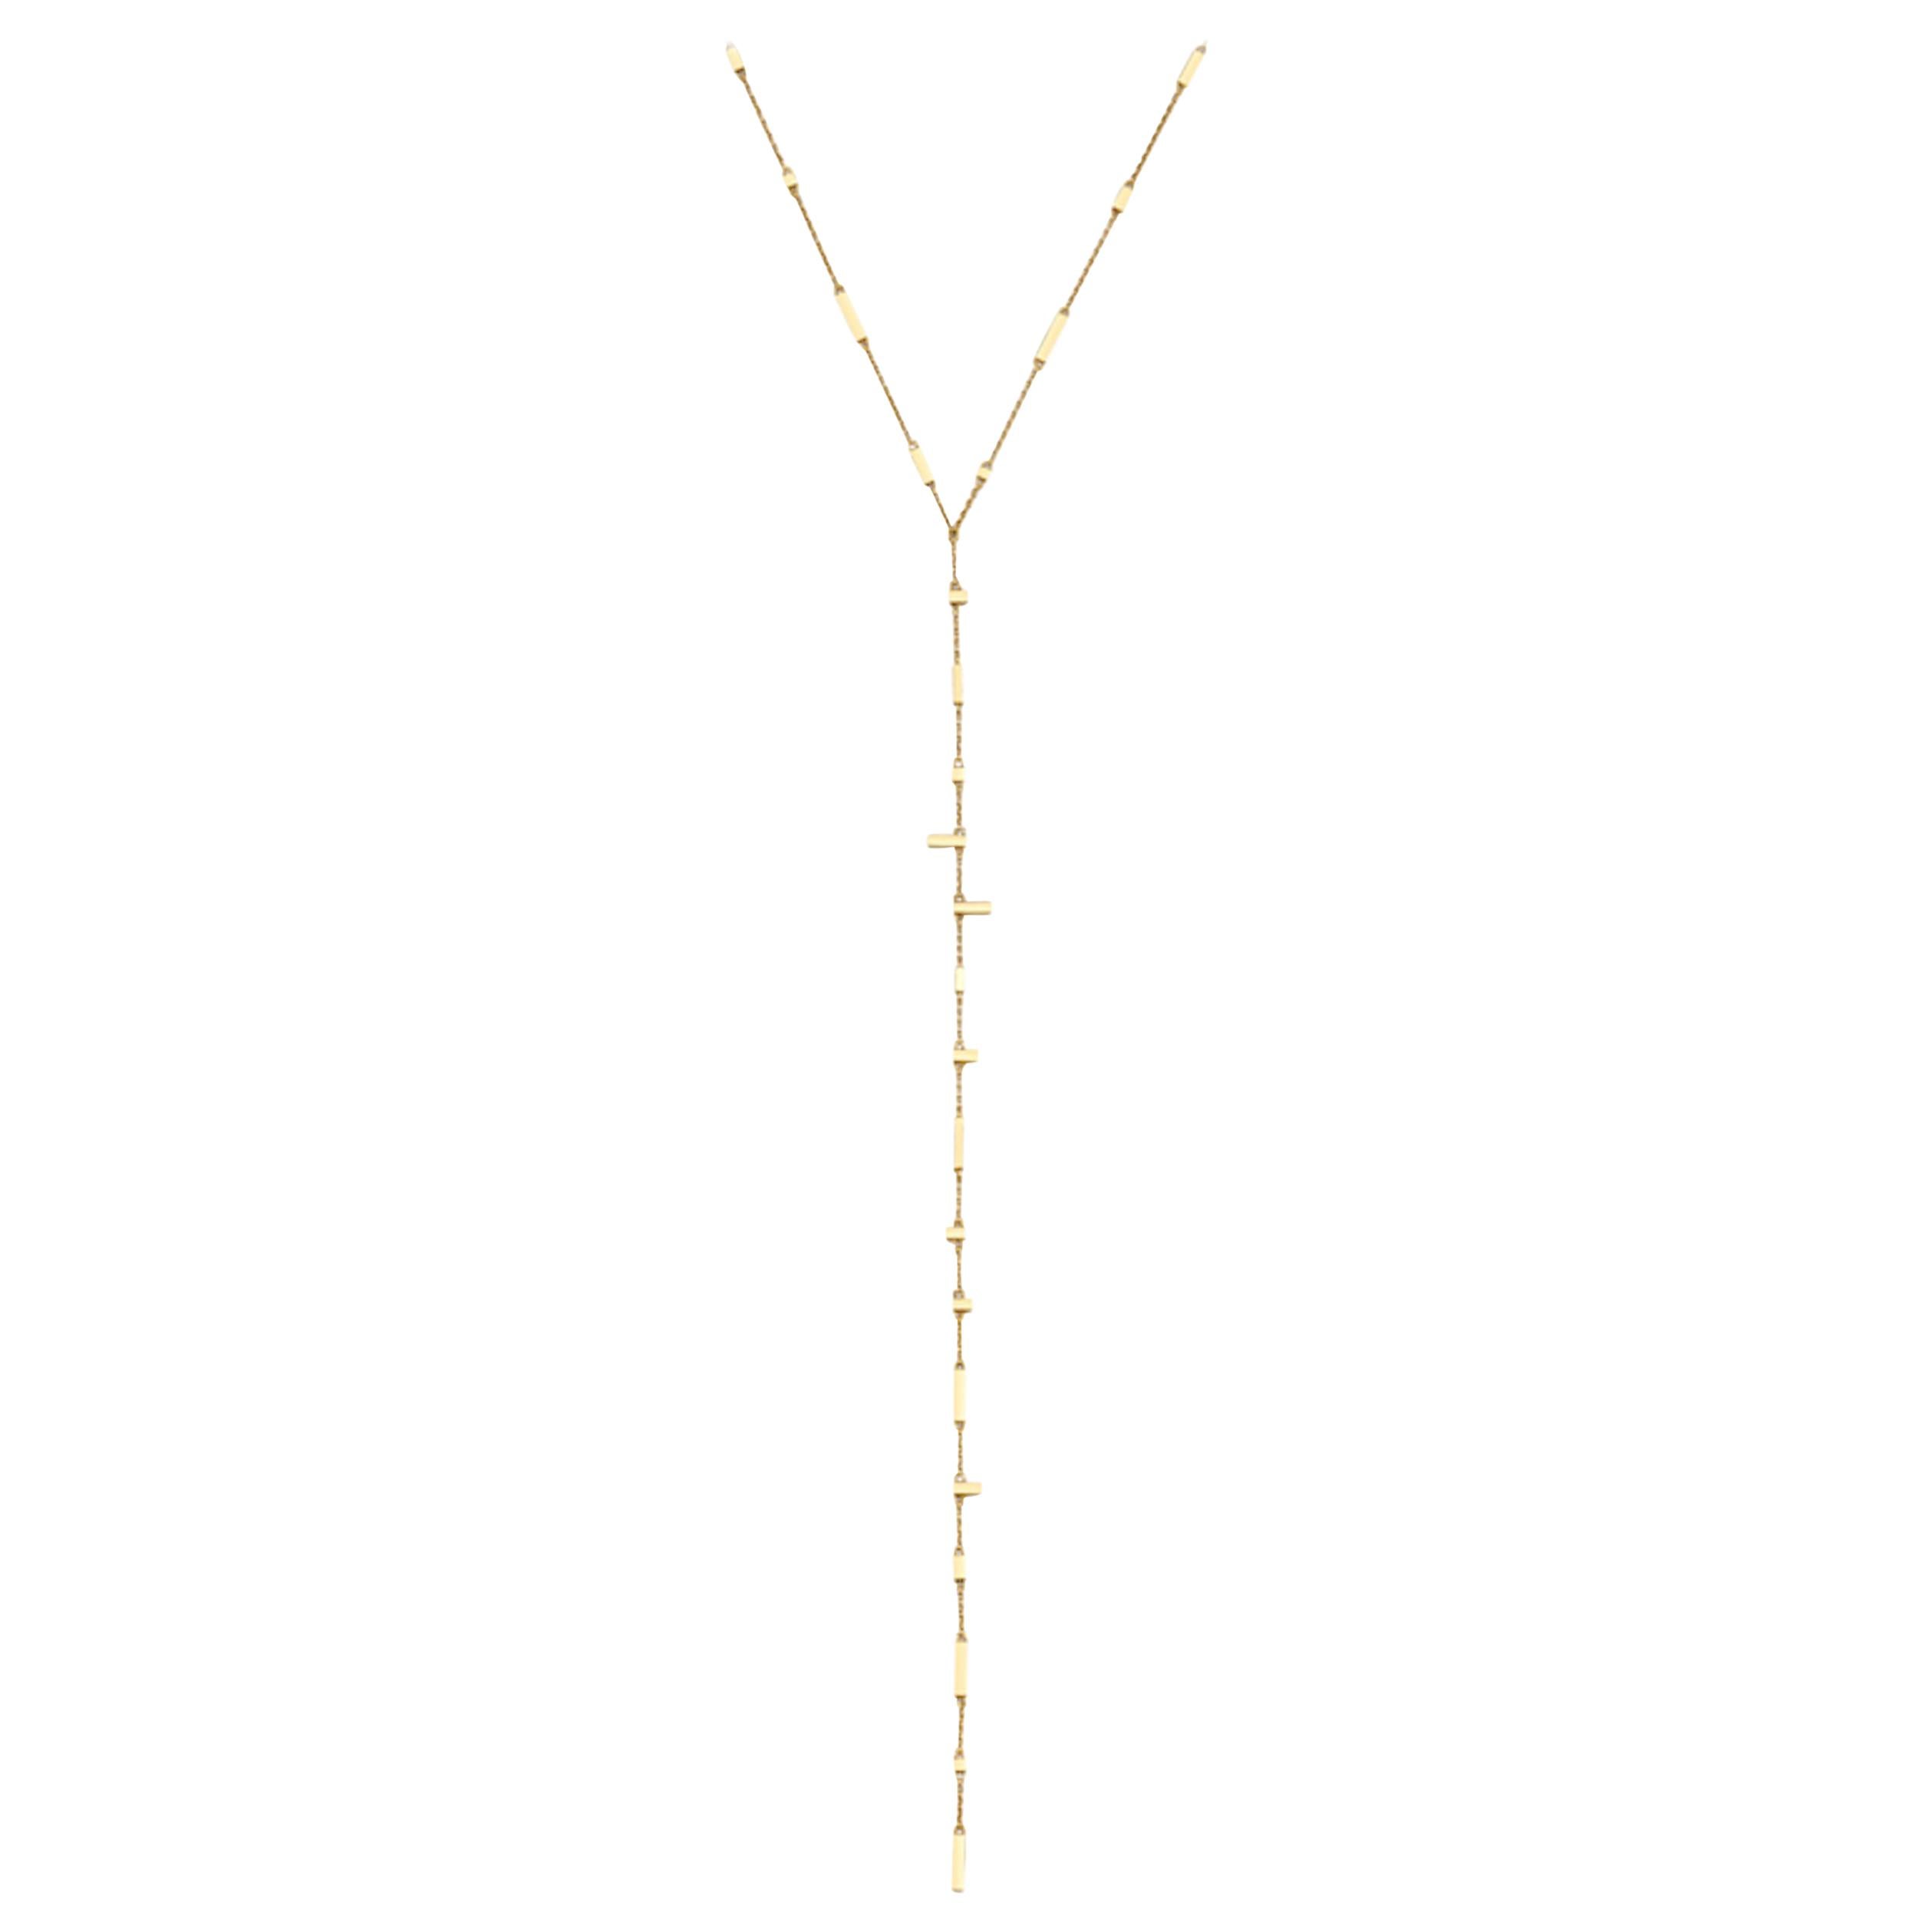 Deconstructed Rosary Line Lariat Necklace 18k Yellow Gold